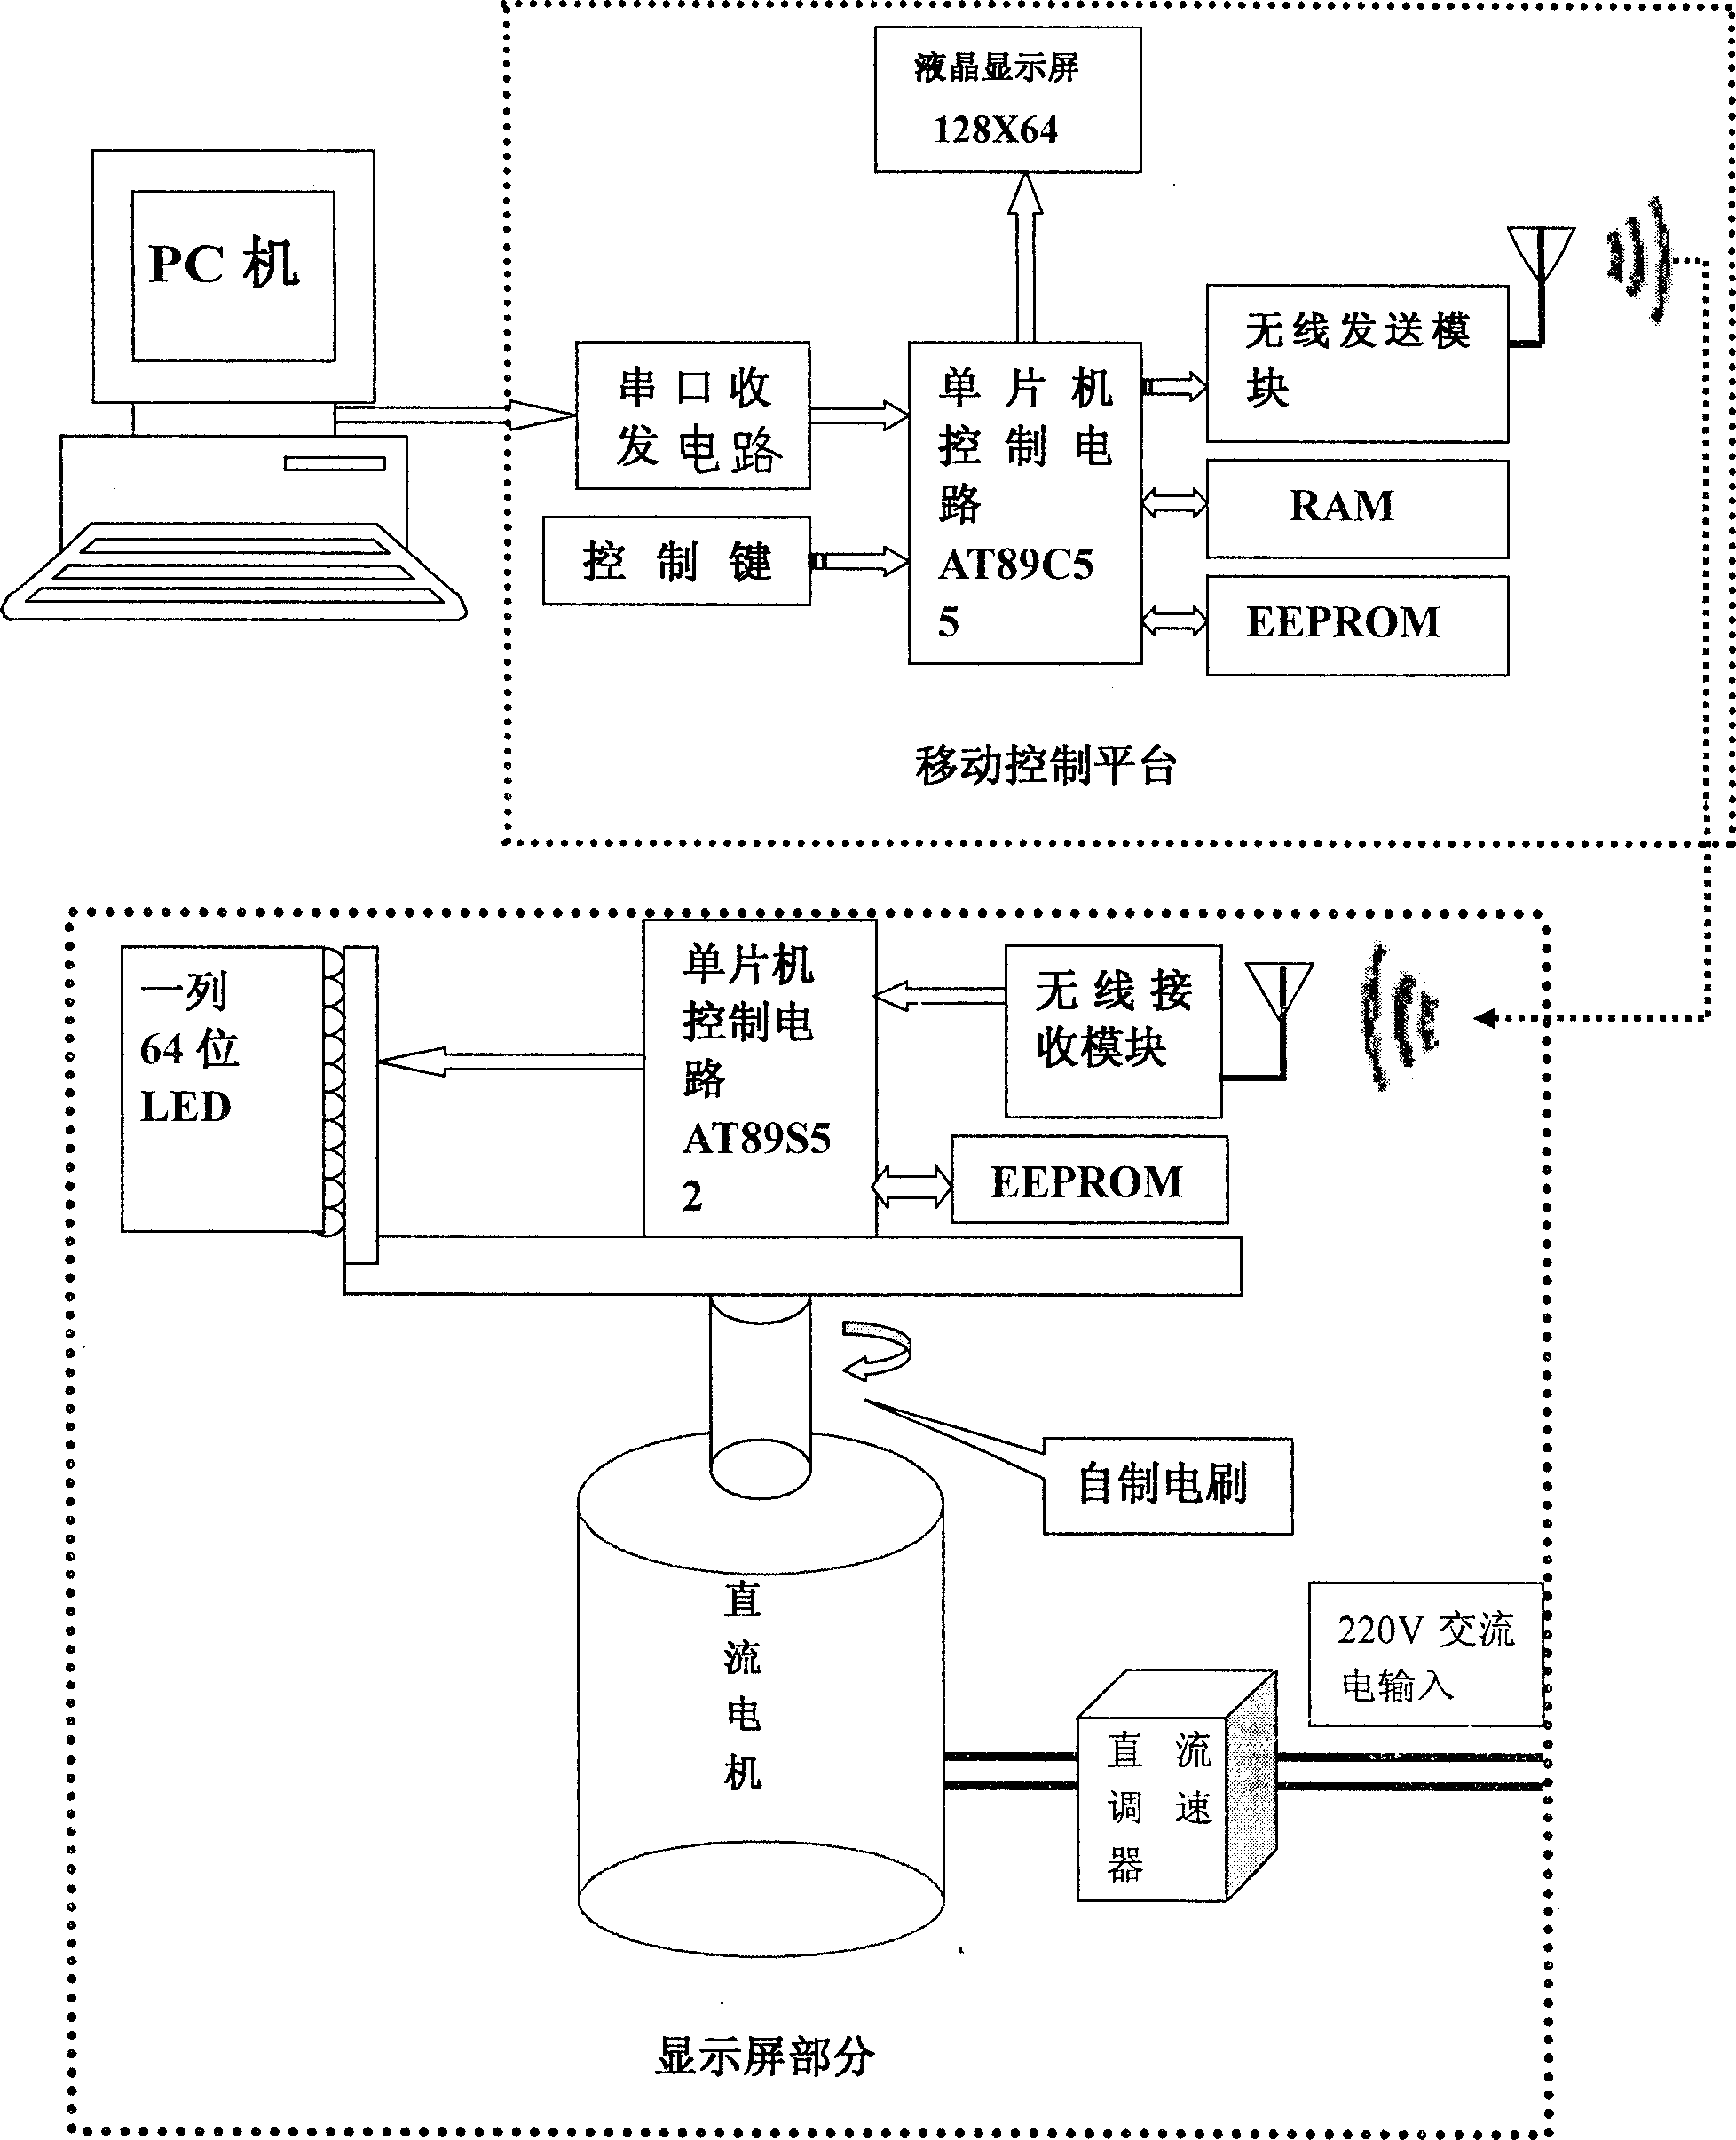 Display system for persistance of vision and its method for realizing display